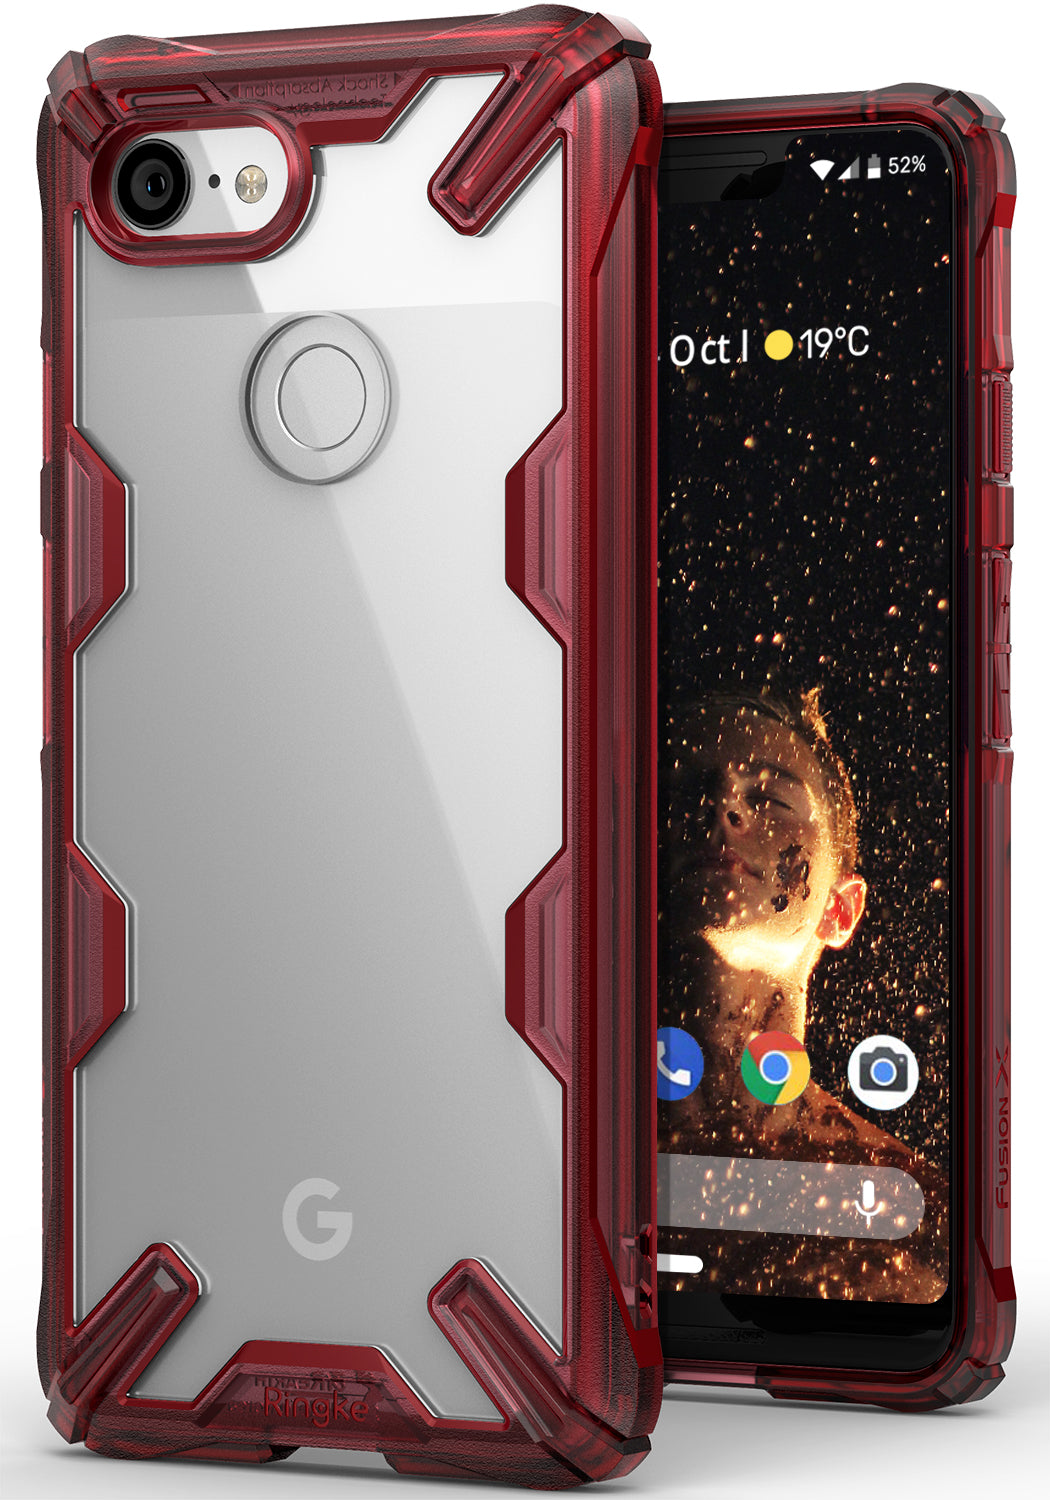 ringke fusion-x rugged heavy duty clear back case cover for google pixel 3 xl main ruby red